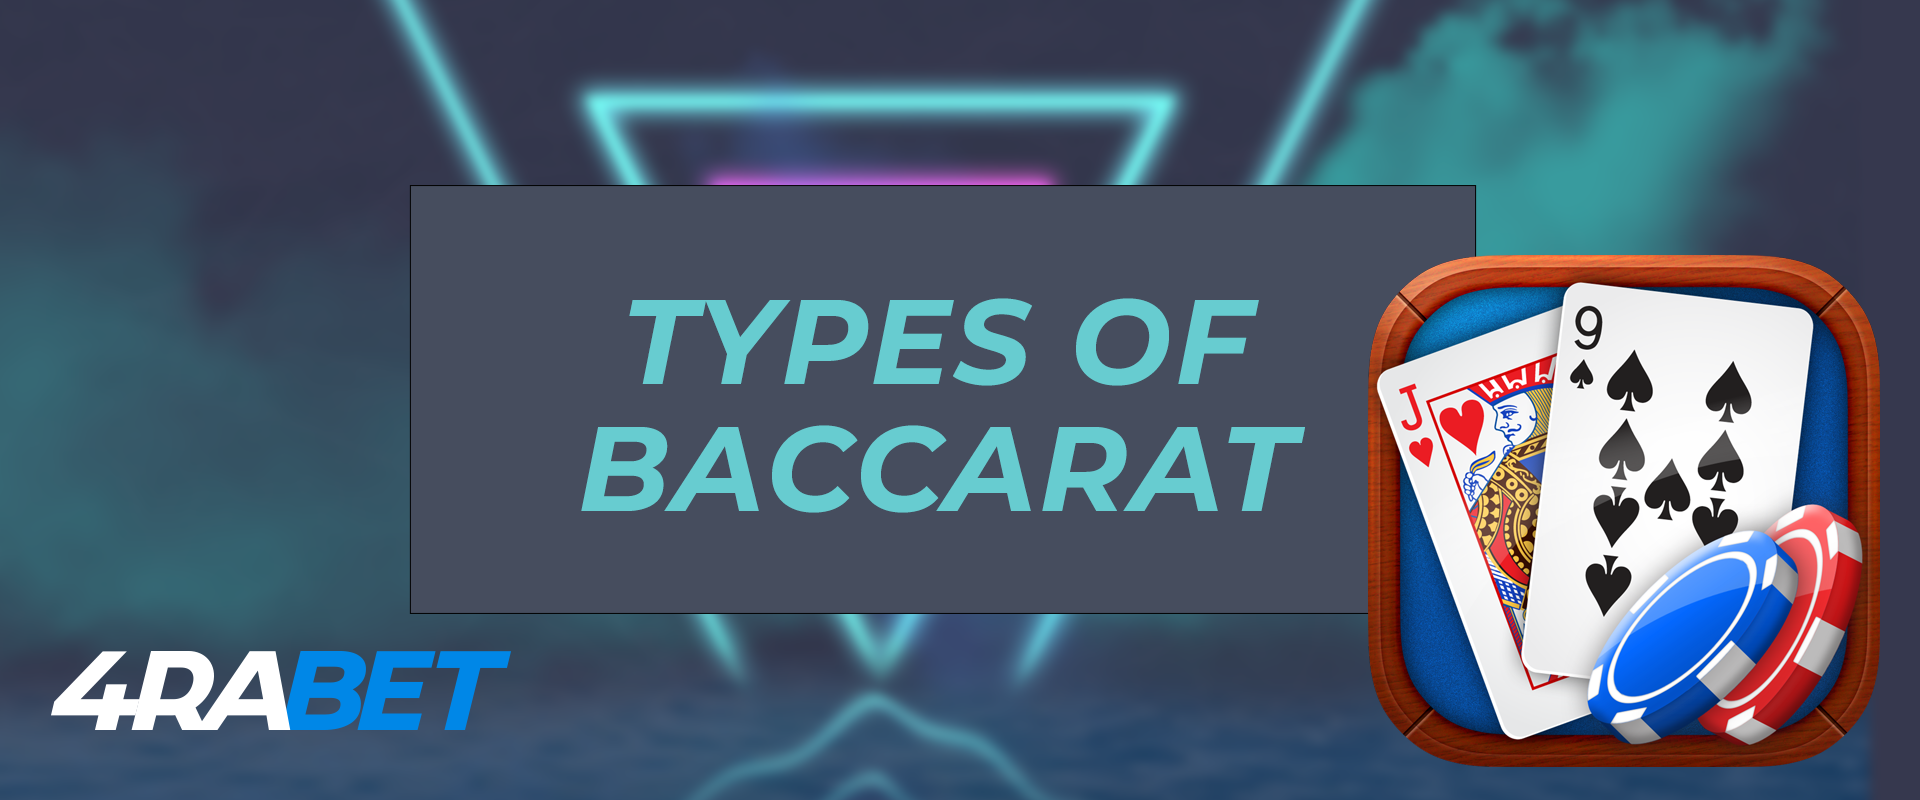 All existing types of baccarat games.